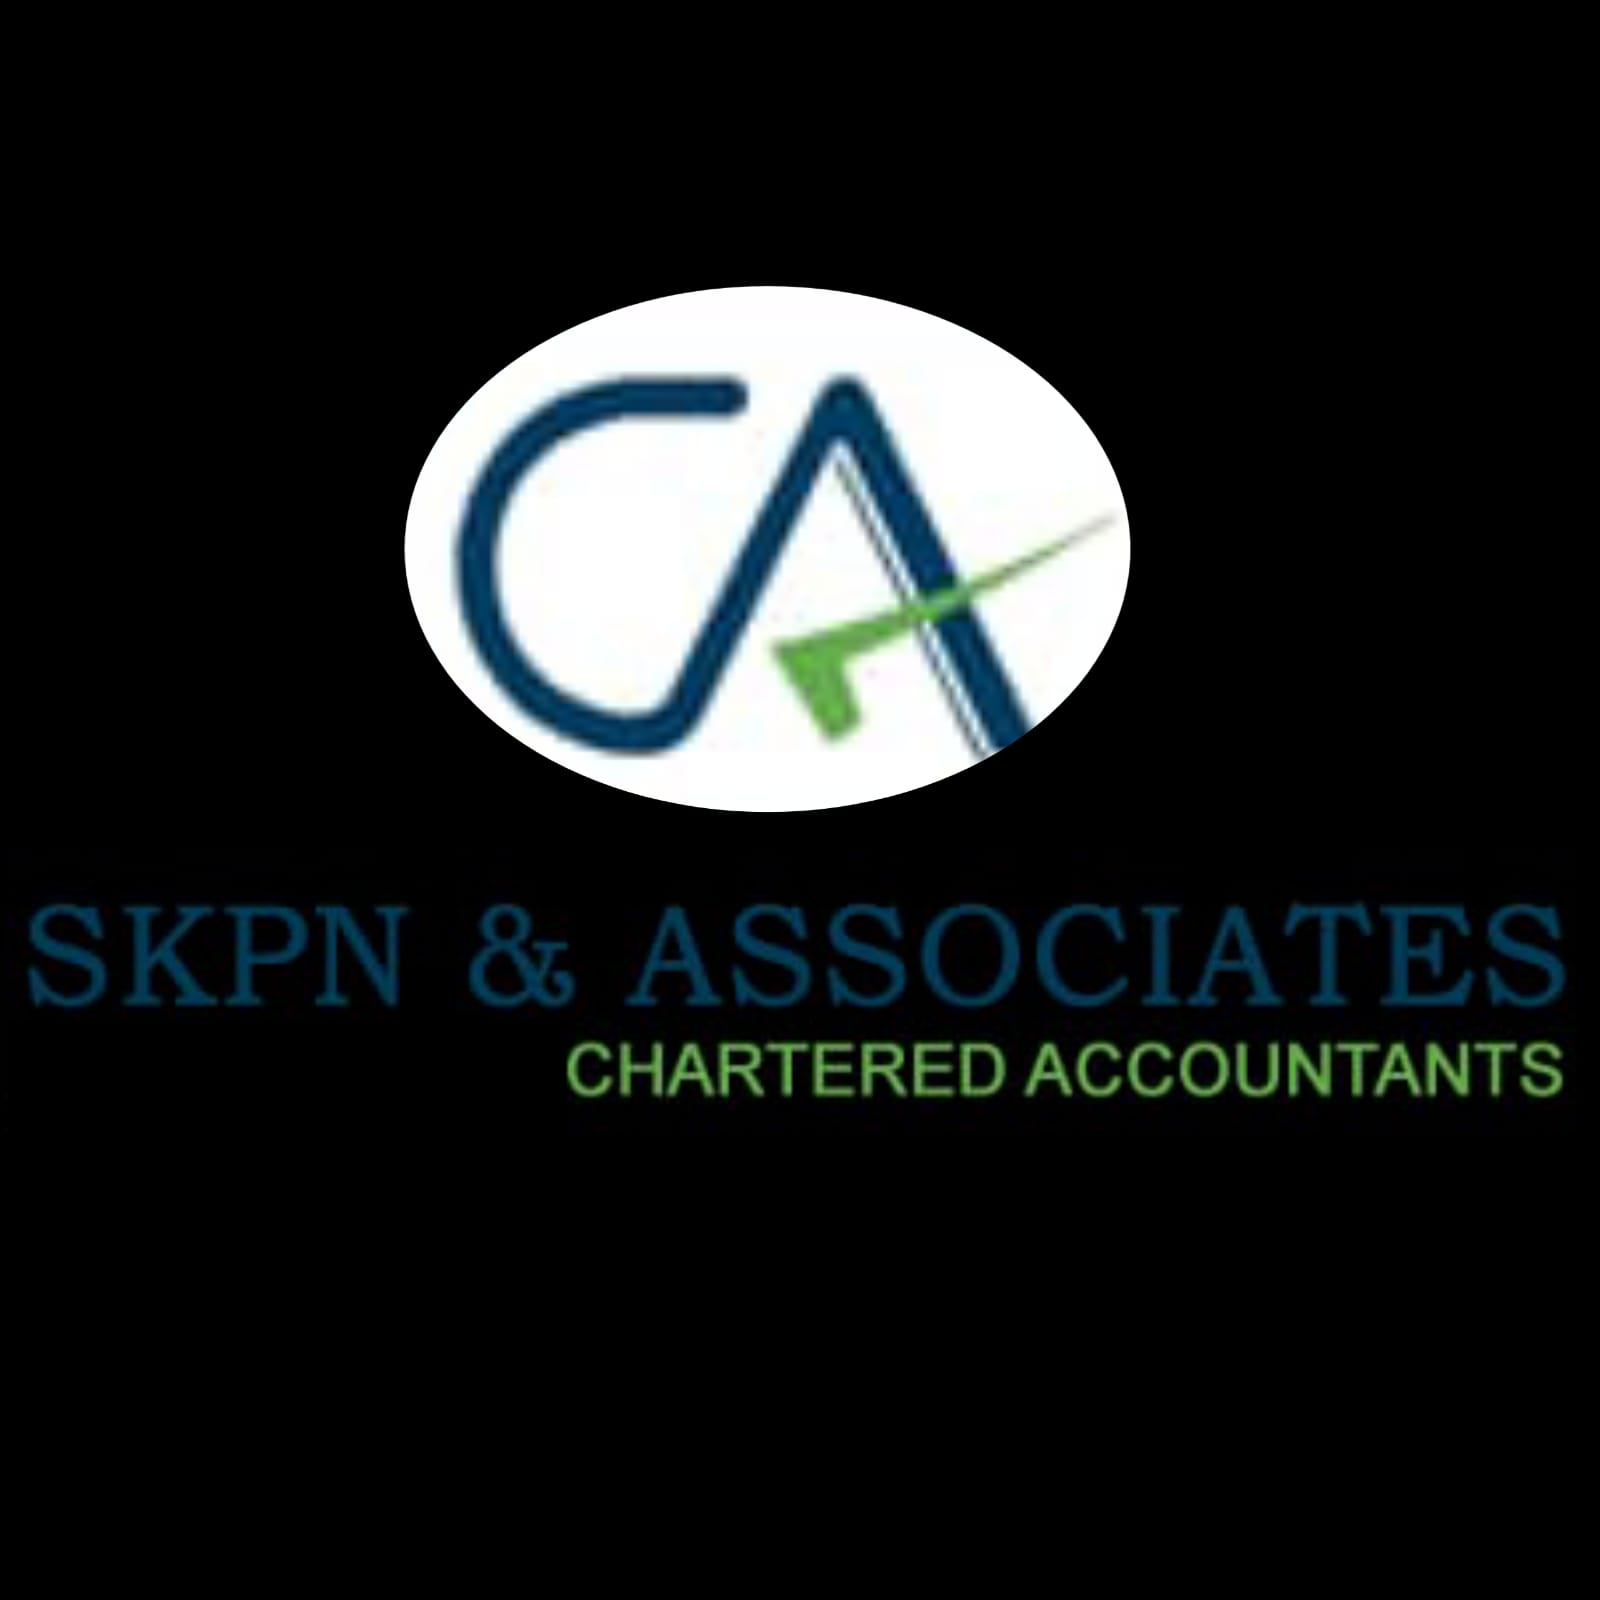 Skpn & Associates Chartered Accountant|Legal Services|Professional Services